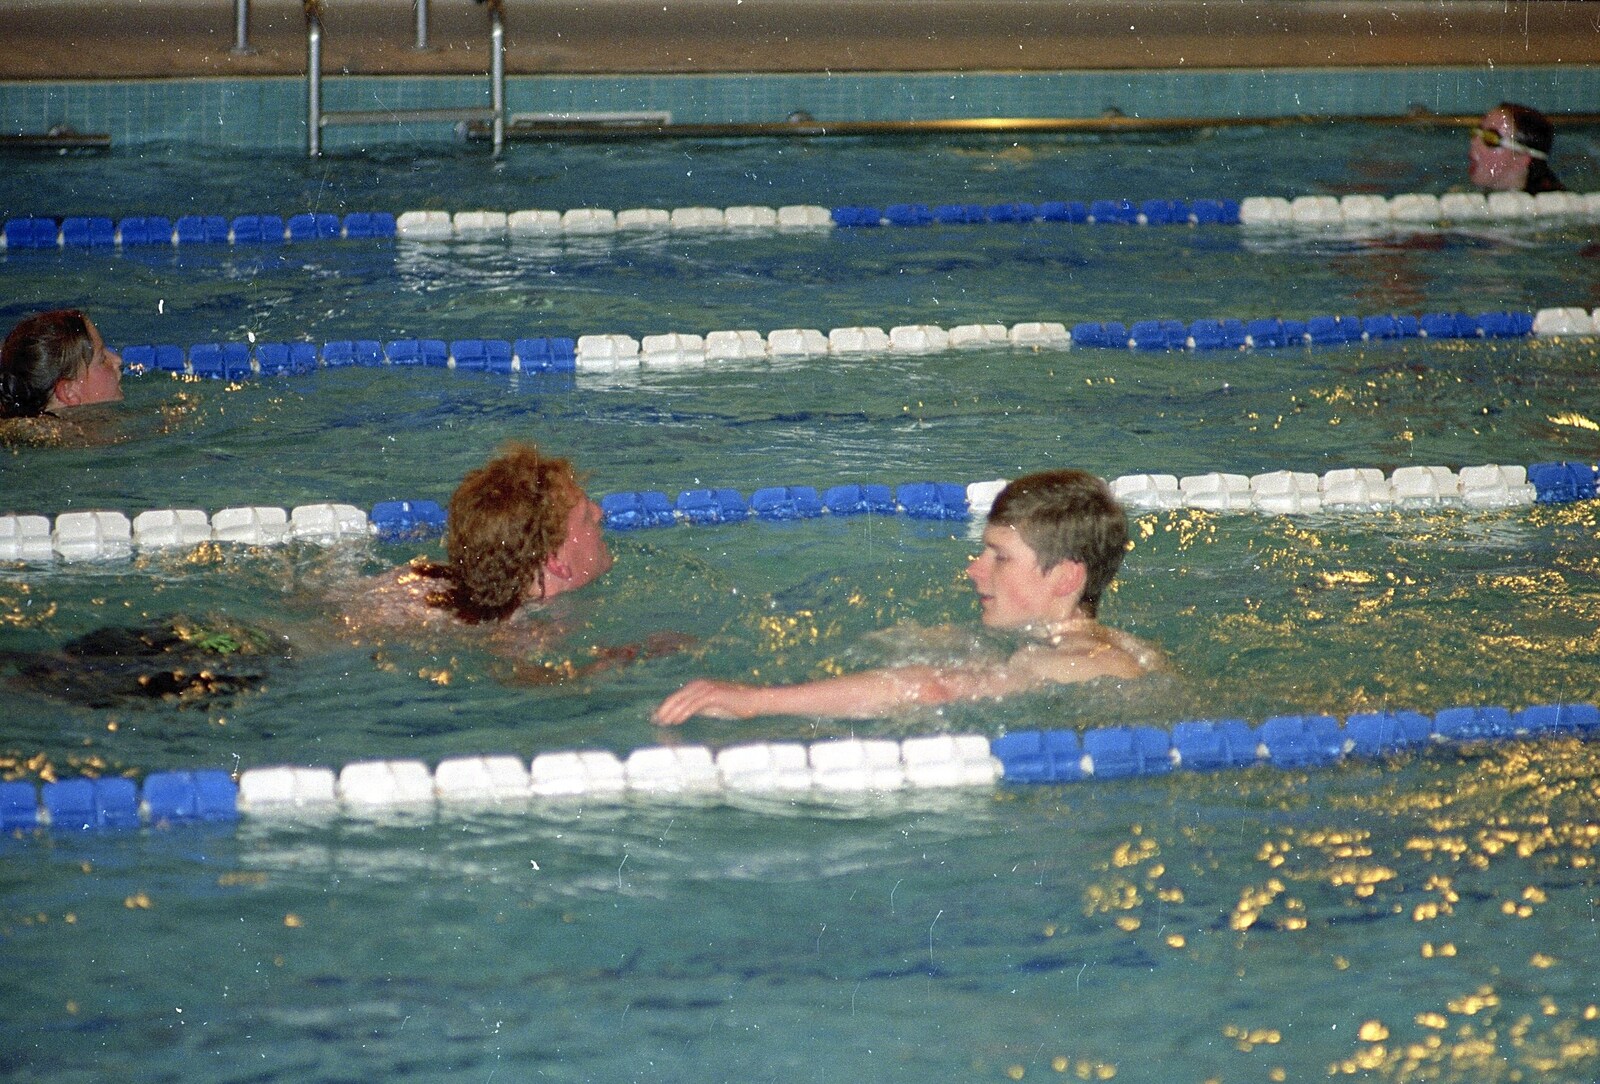 Wavy and Ninja M pass in the swim lane from The Swan does the BHF Sponsored Swim, Diss Pool, Norfolk - 3rd October 1994